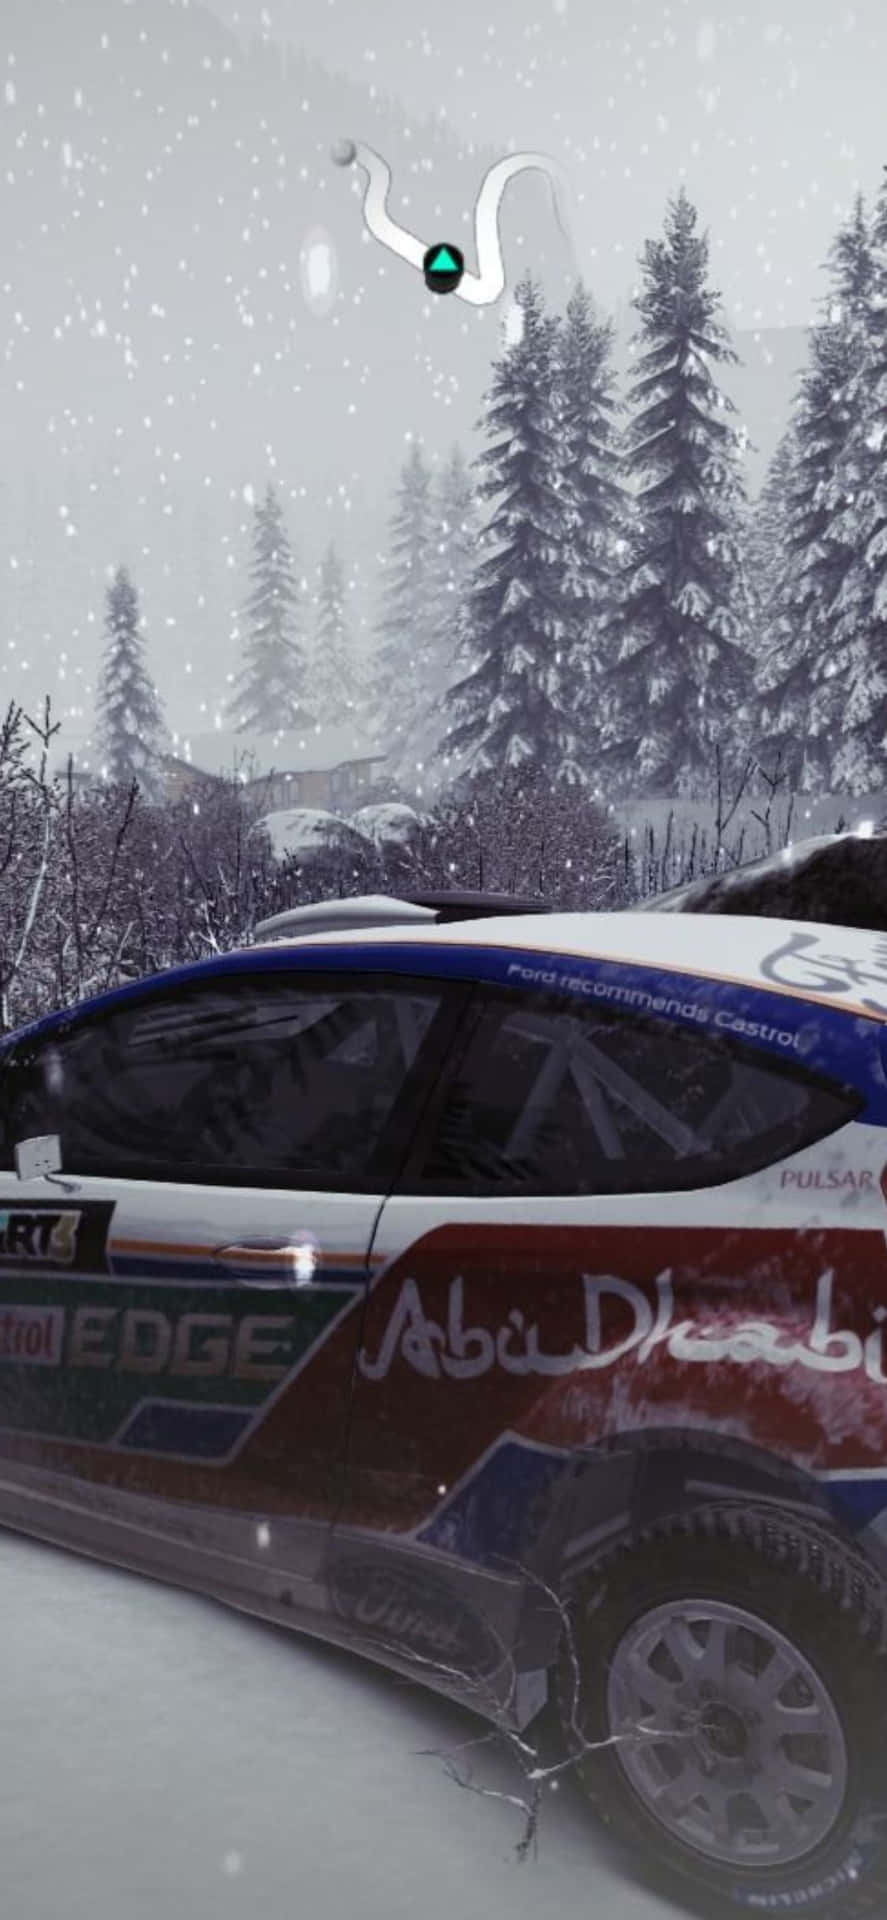 "Feel the Power of the iPhone Xs in Dirt 3"